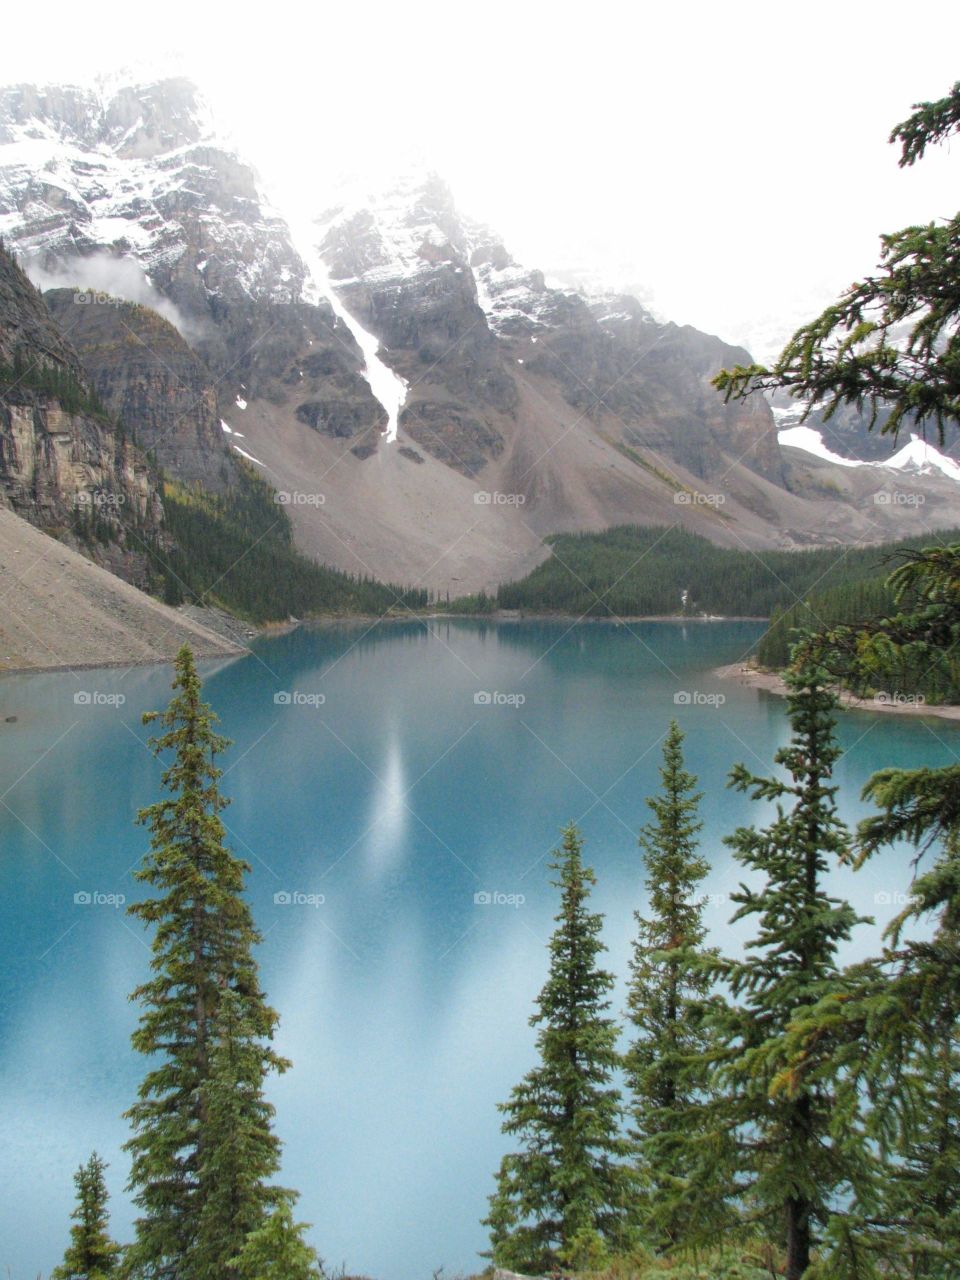 Spectacular views from moraine lake and peaks